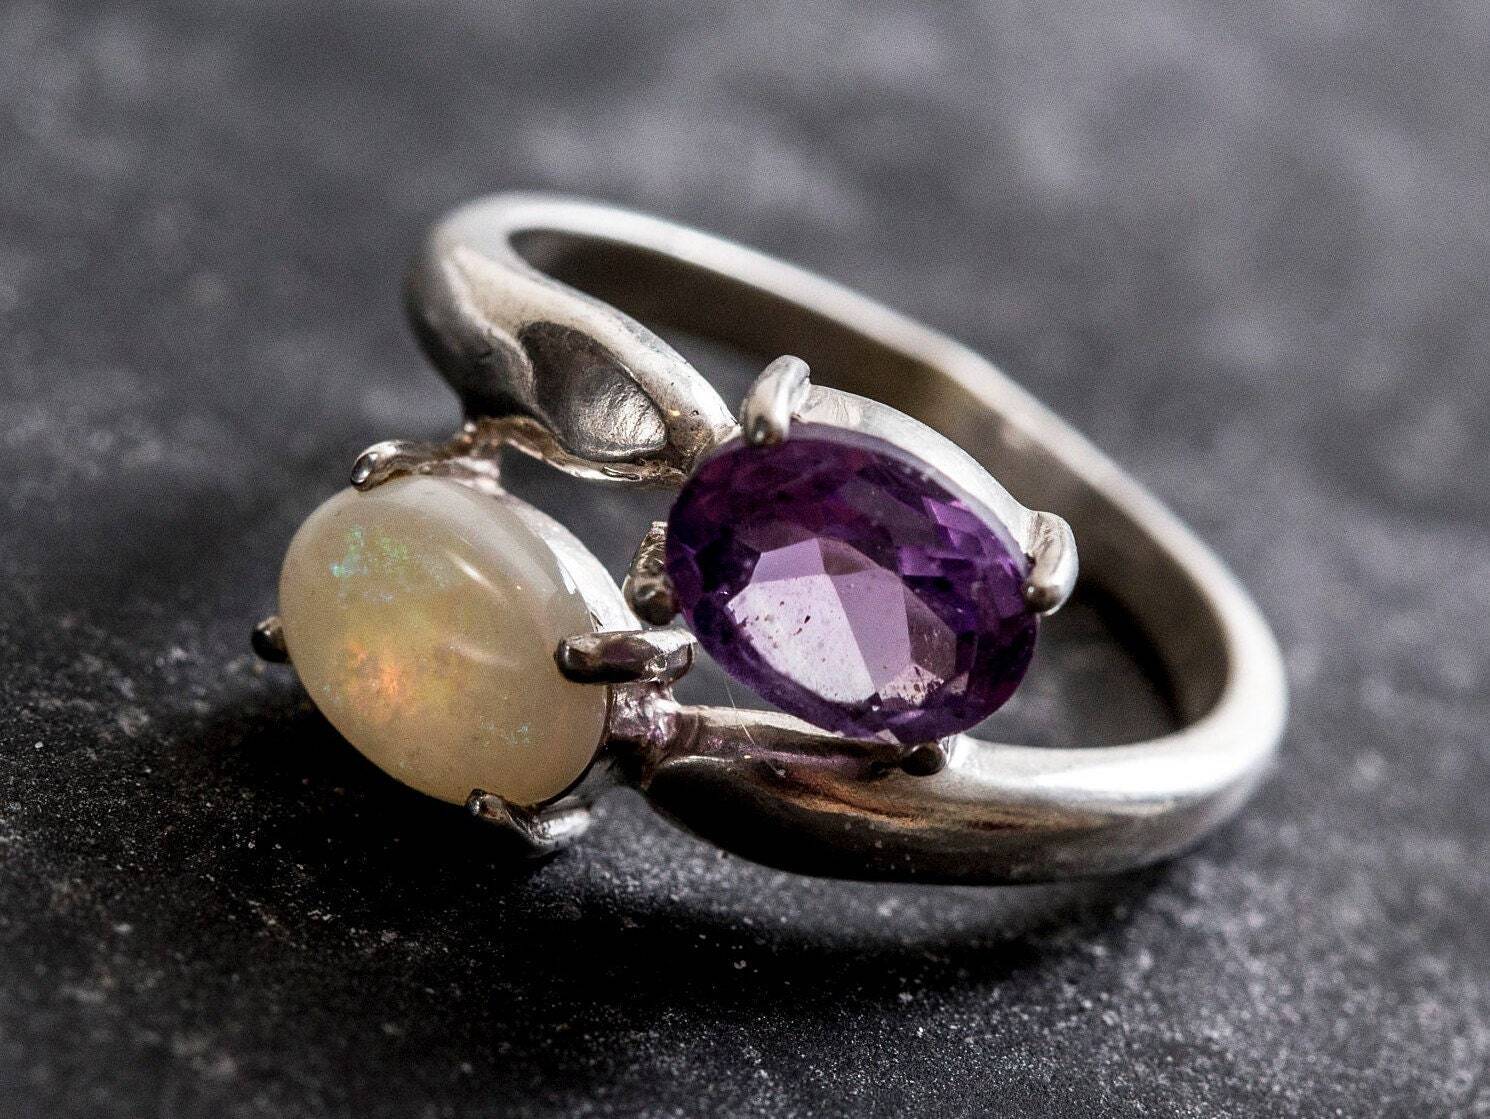 Unique Opal Ring, Natural Opal Ring, Amethyst Ring, Vintage Rings, October Birthstone, February Birthstone, Silver Ring, Amethyst, Opal